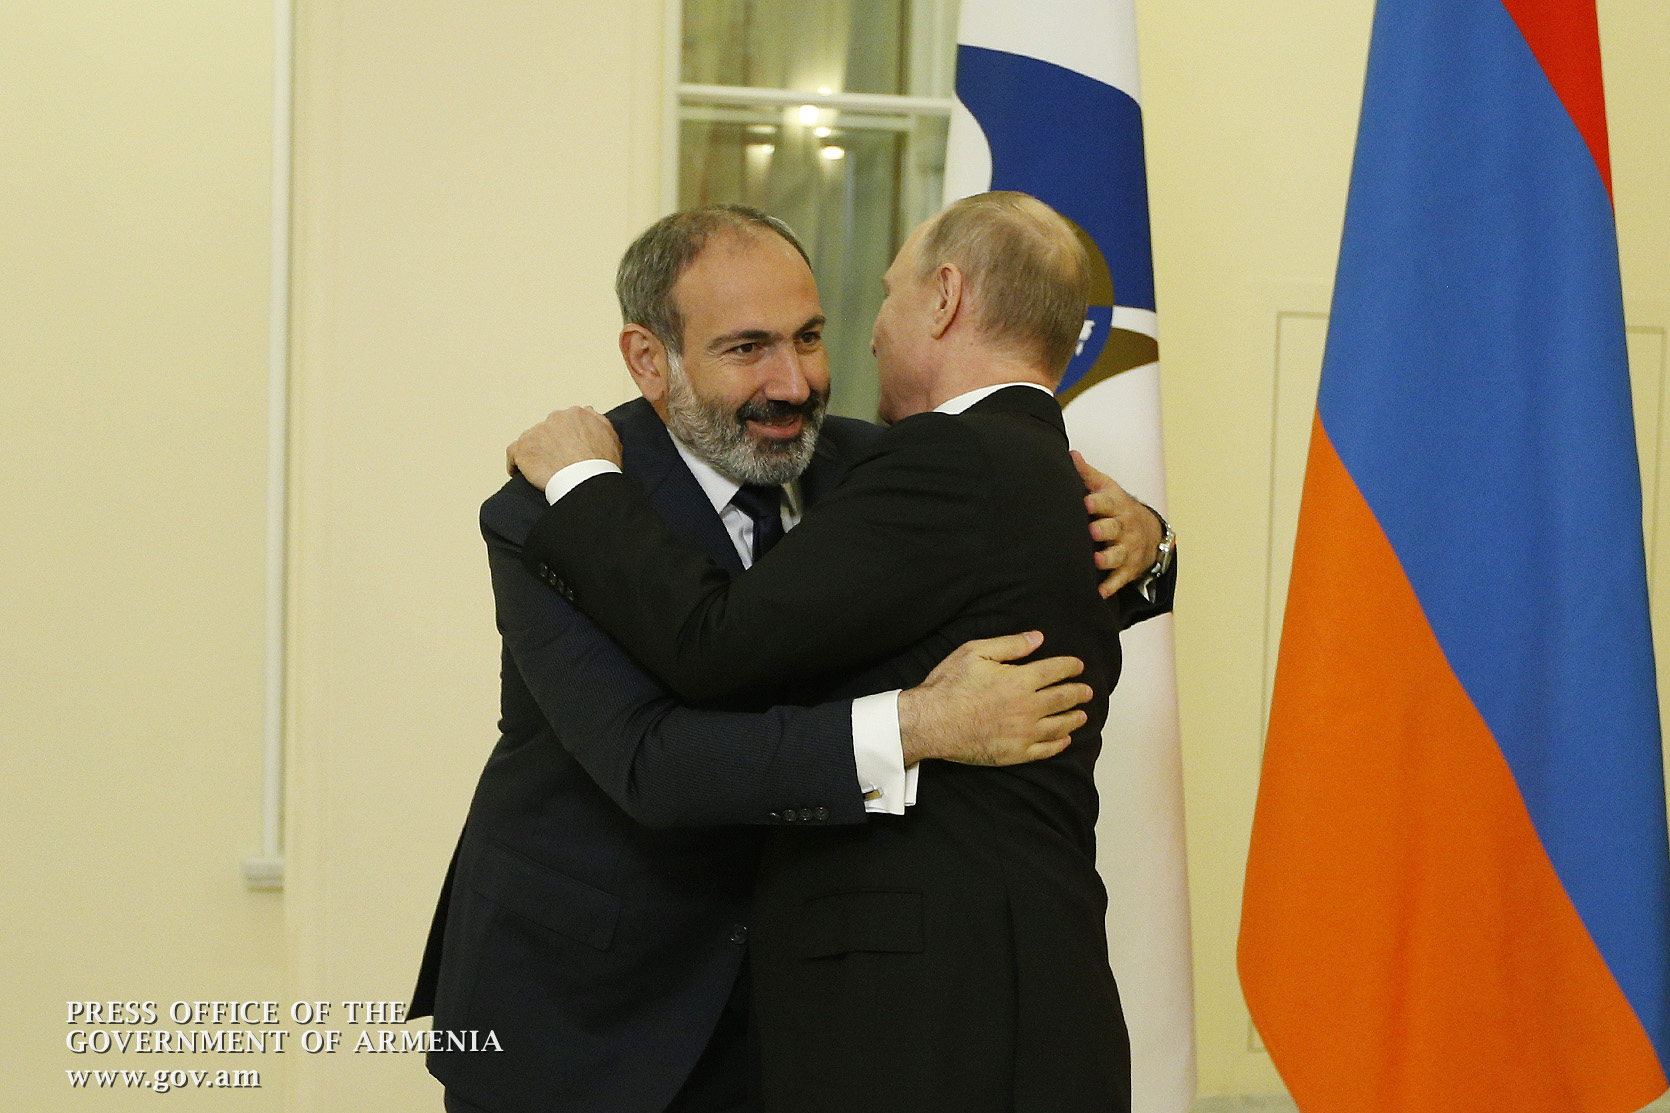 Nikol Pashinyan on meeting with Putin: ‘Our meetings not enough to discuss all issues in full detail’